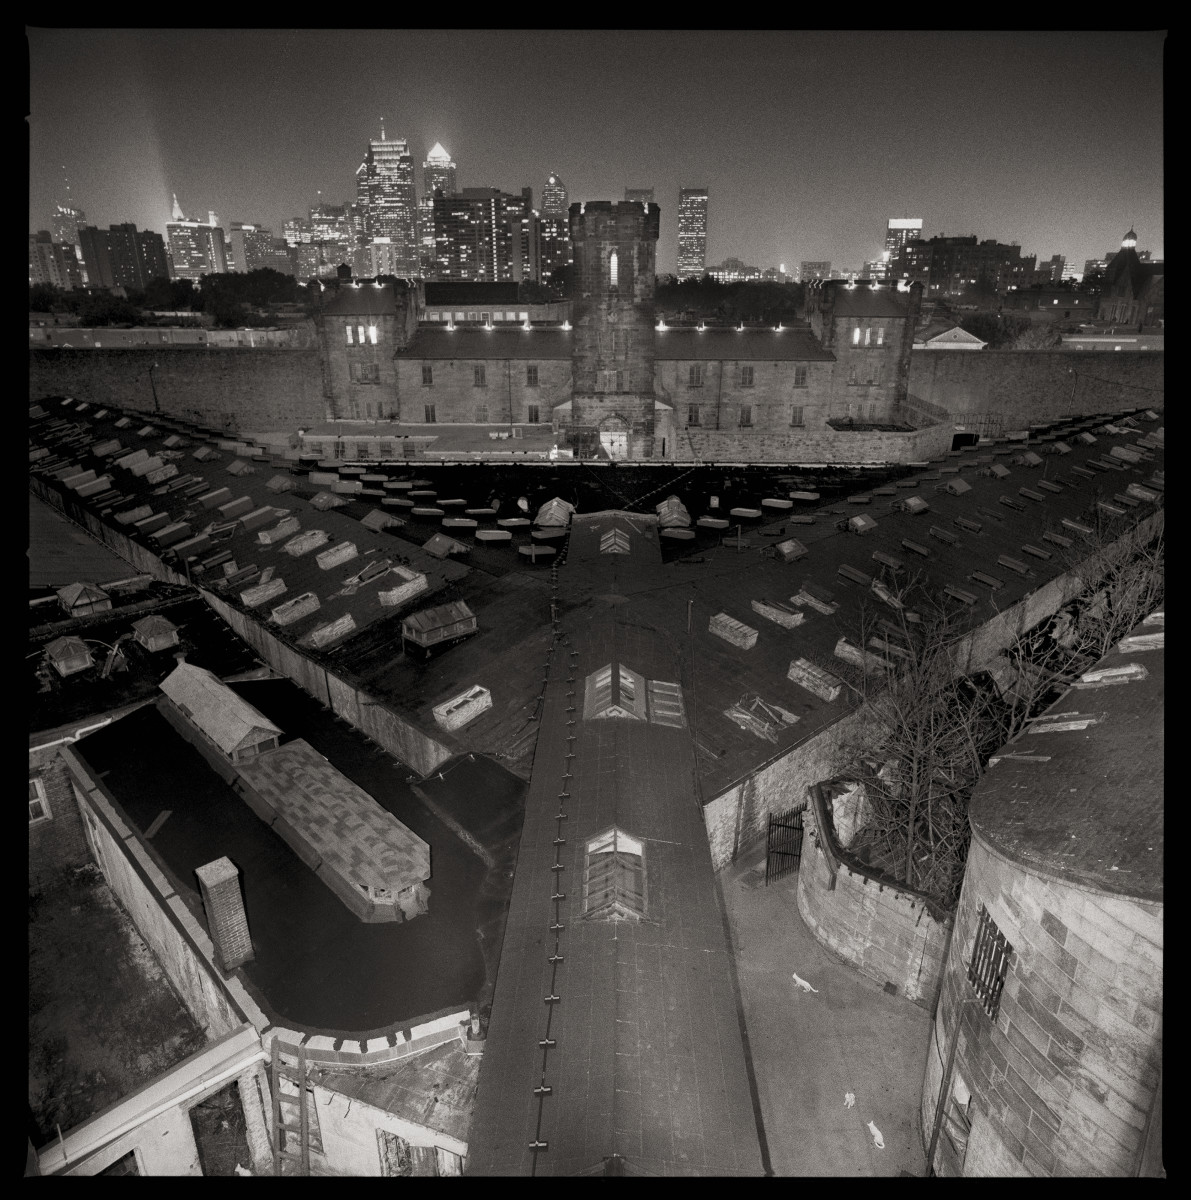 Looking Towards Downtown Philadelphia by Eric T. Kunsman  Image: ID: A black and white image shows a view of the compound with the Philadelphia skyline in the background.  The compound has a wing in the center, and two branching off to each side from the center.  There is also a wing in the back.  The image was taken at night, and the lights from downtown Philadelphia are twinkling.